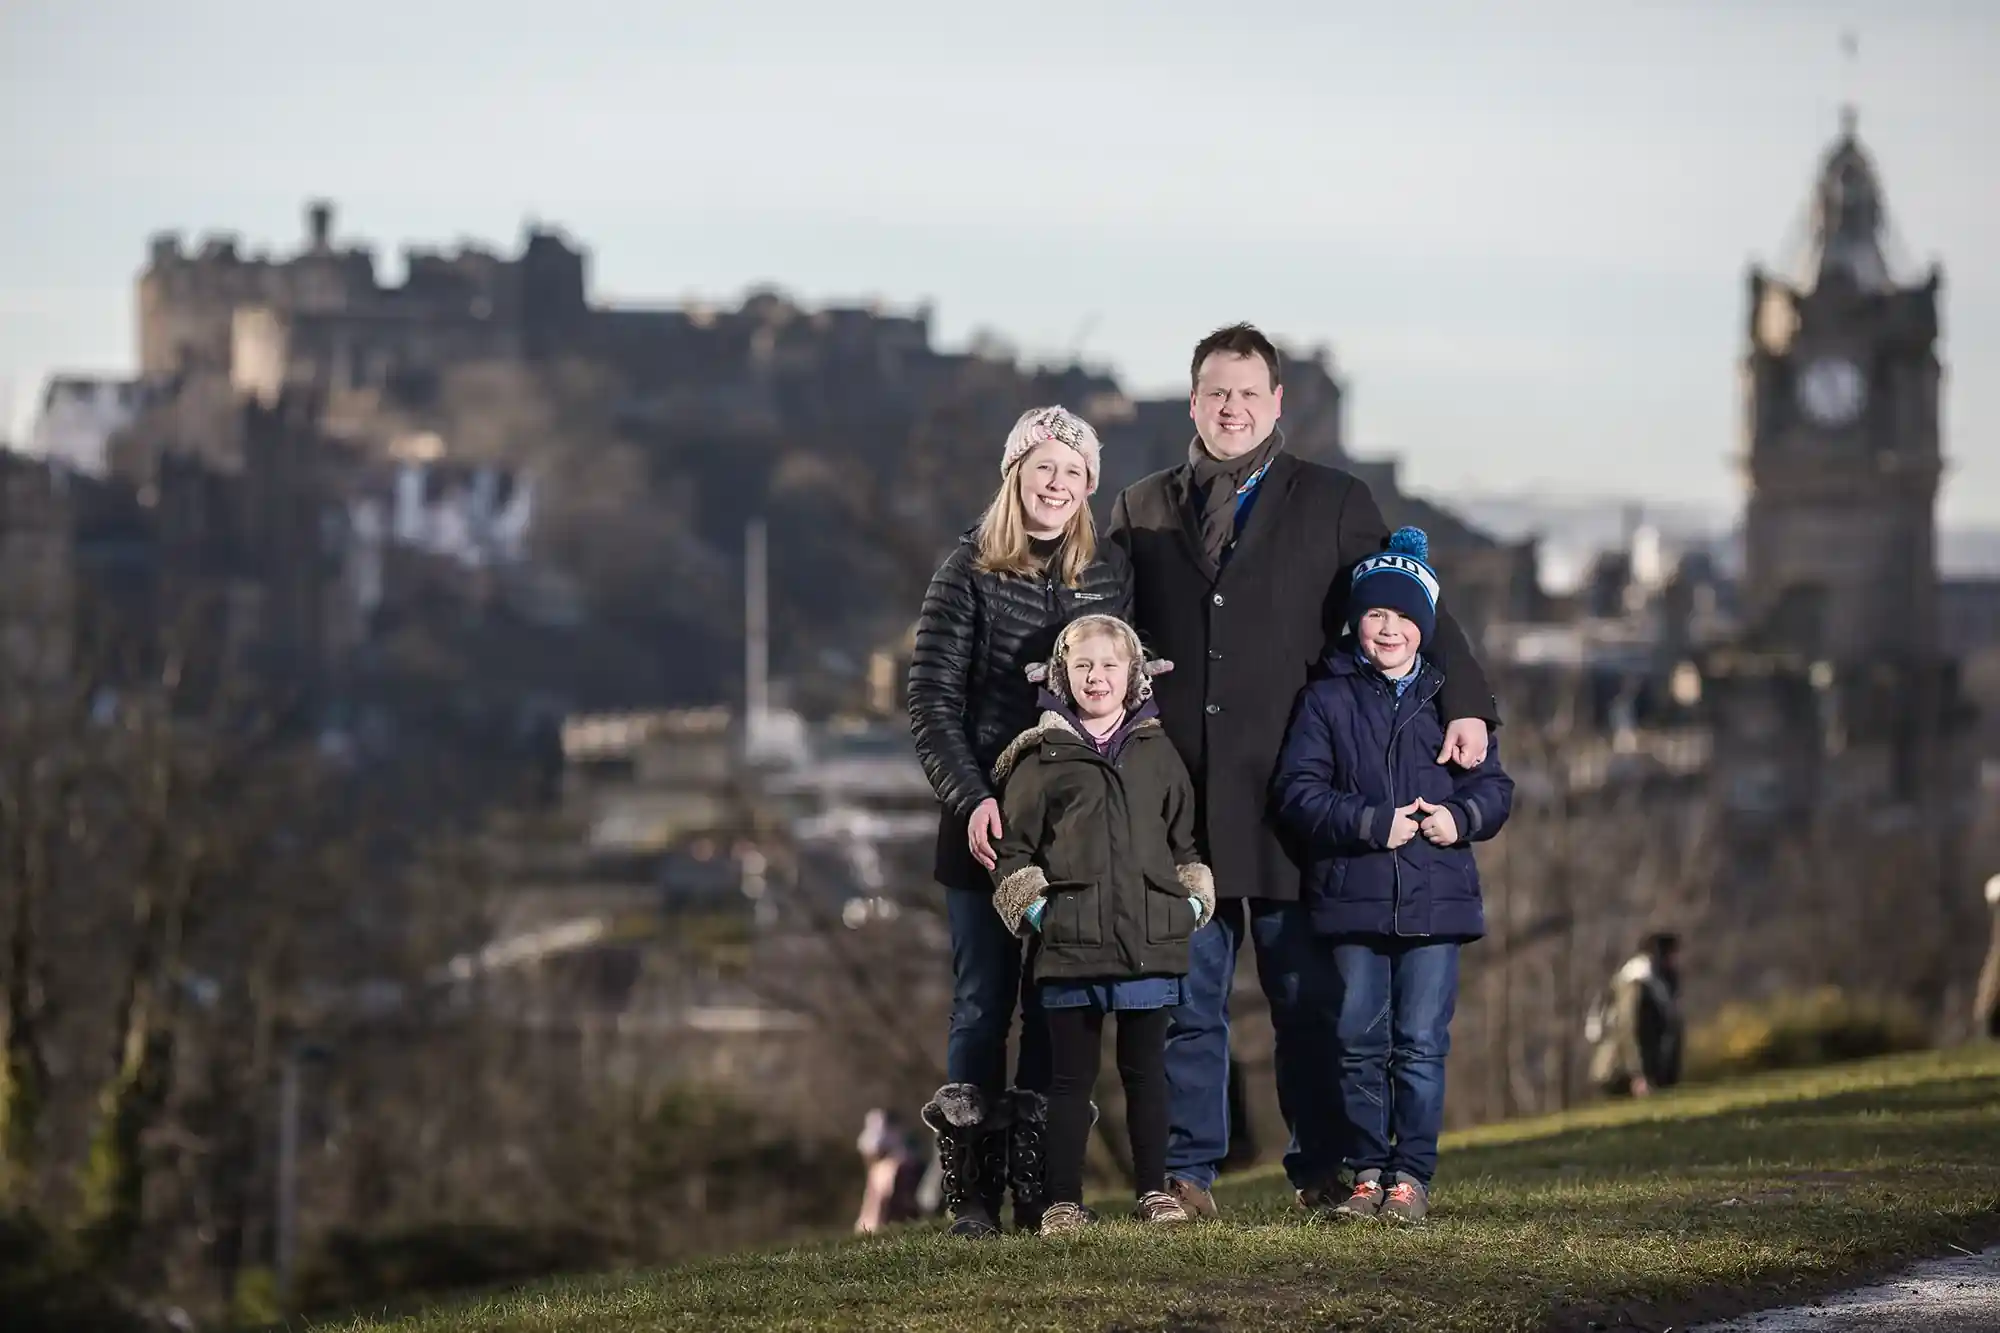 A family of four poses outdoors with a historic castle and clock tower in the background.